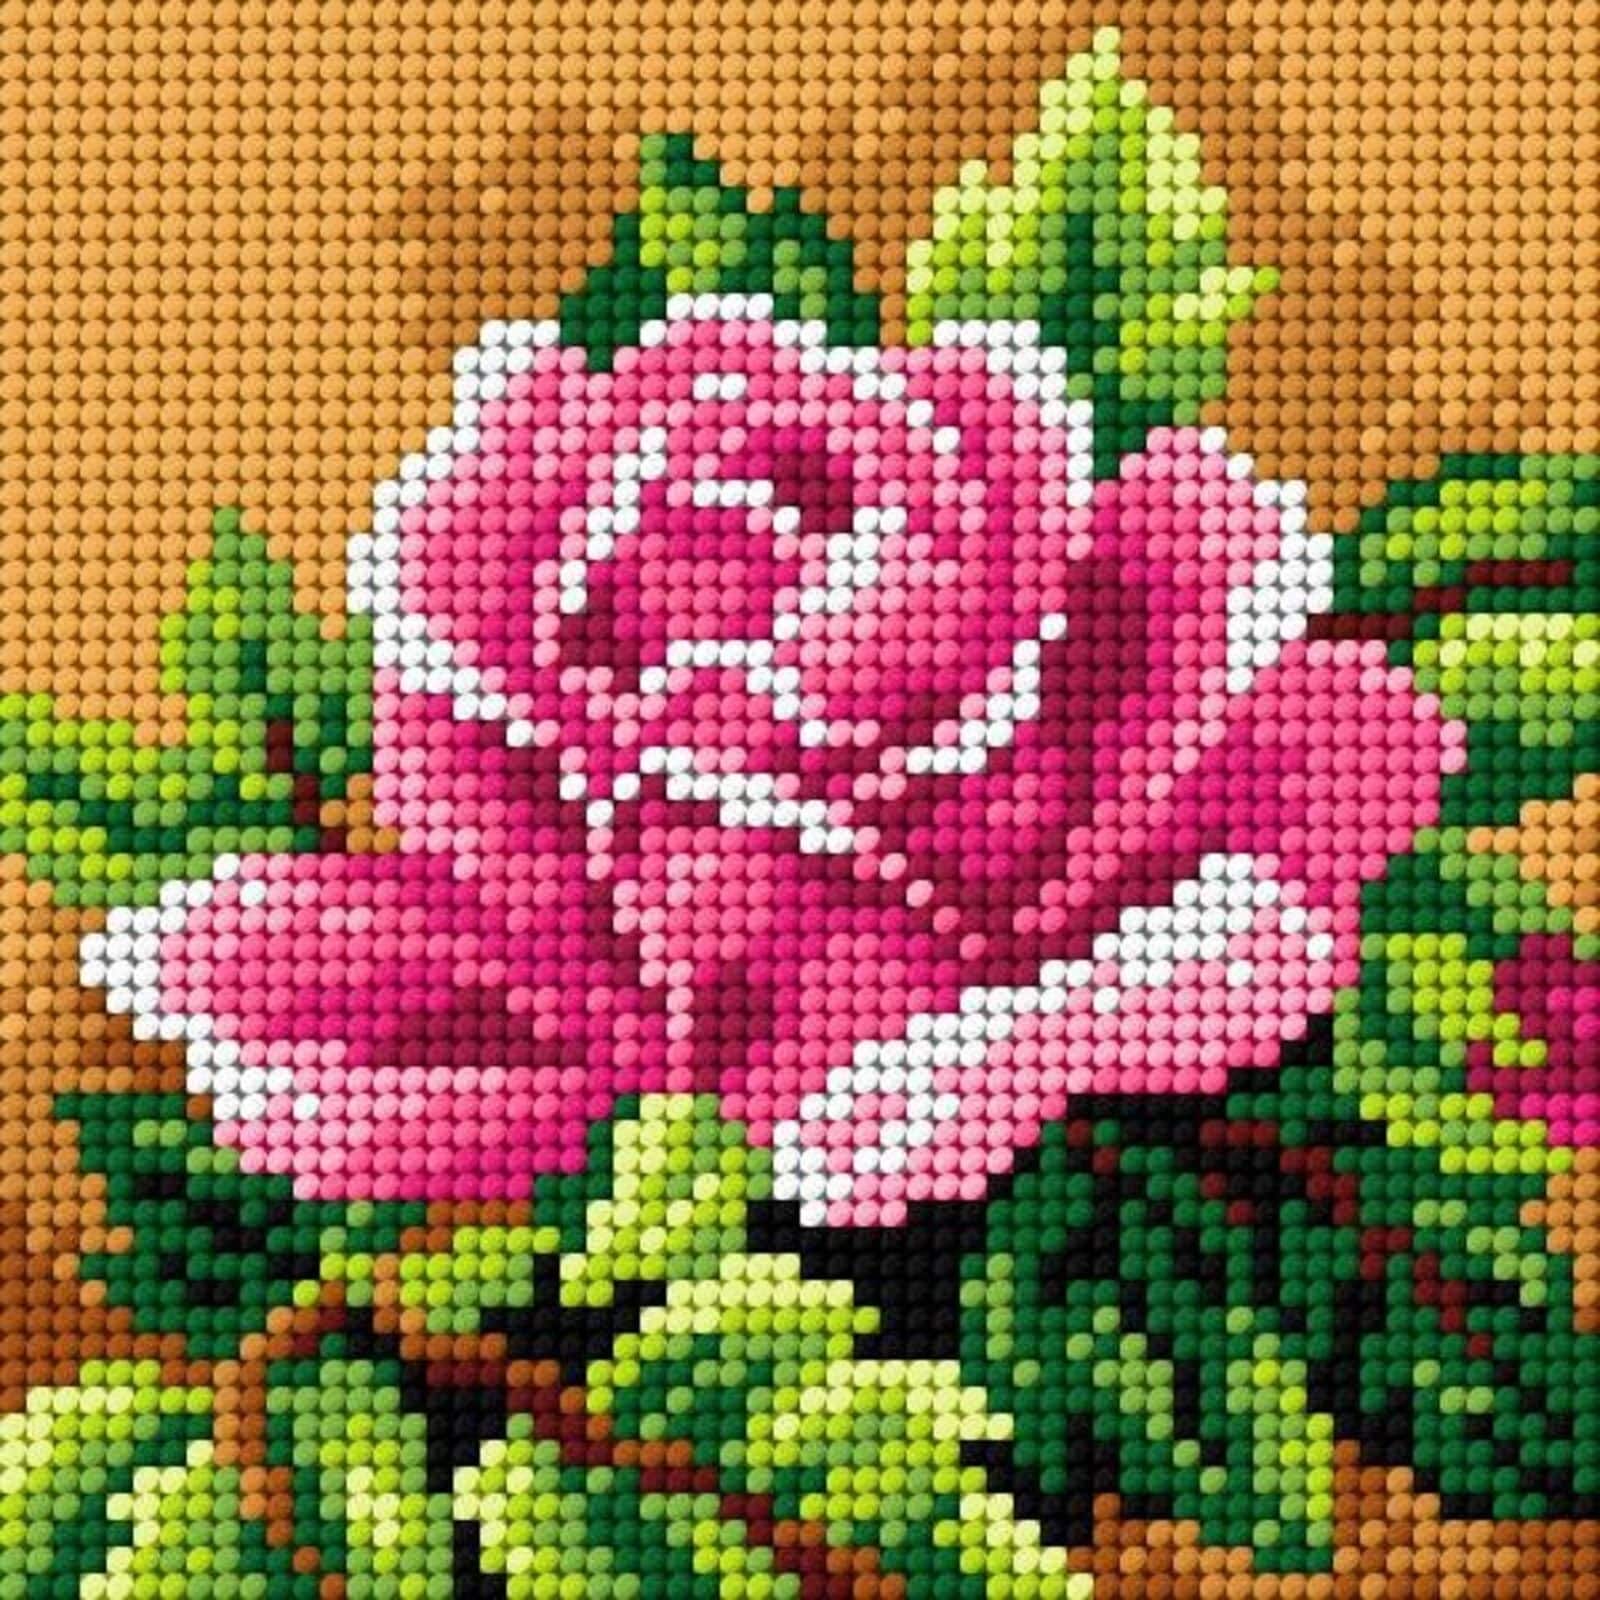 Needlepoint Canvas for halfstitch Without Yarn Orchid 3010f - Printed Tapestry Canvas